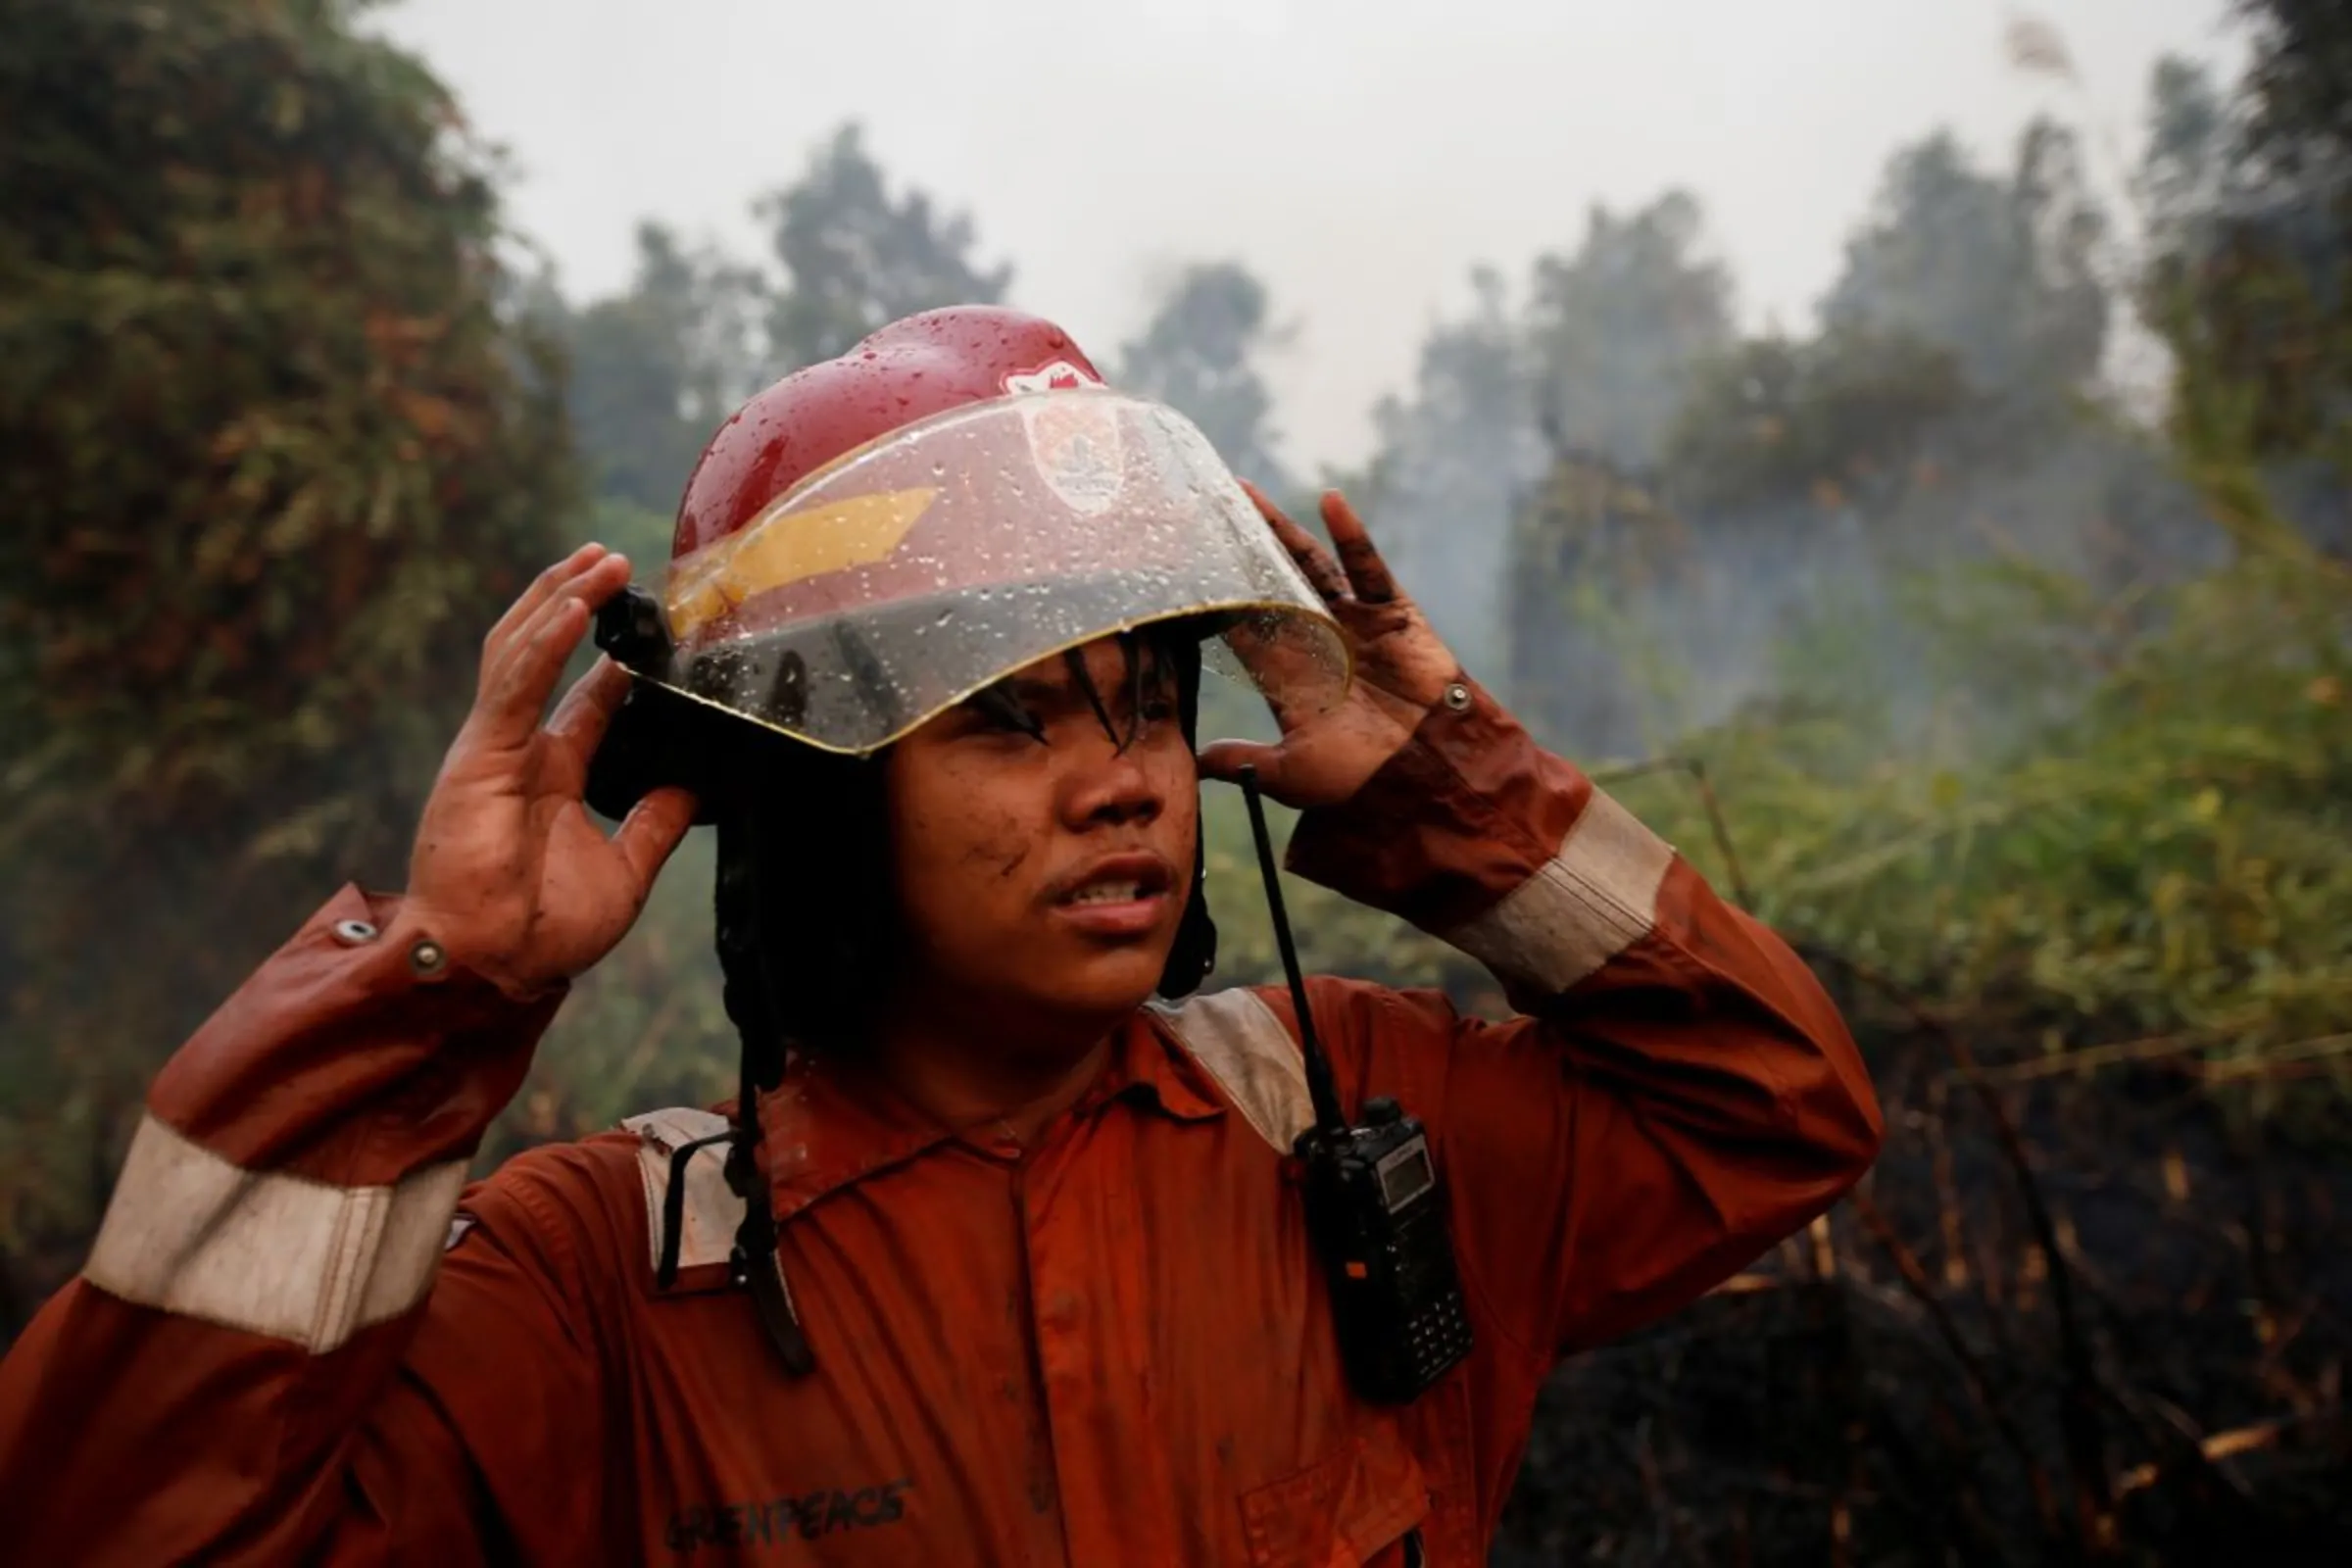 A volunteer firefighter reacts as he extinguishes forest fires in Pulang Pisau regency near Palangka Raya, Central Kalimantan province, Indonesia, September 13, 2019. REUTERS/Willy Kurniawan